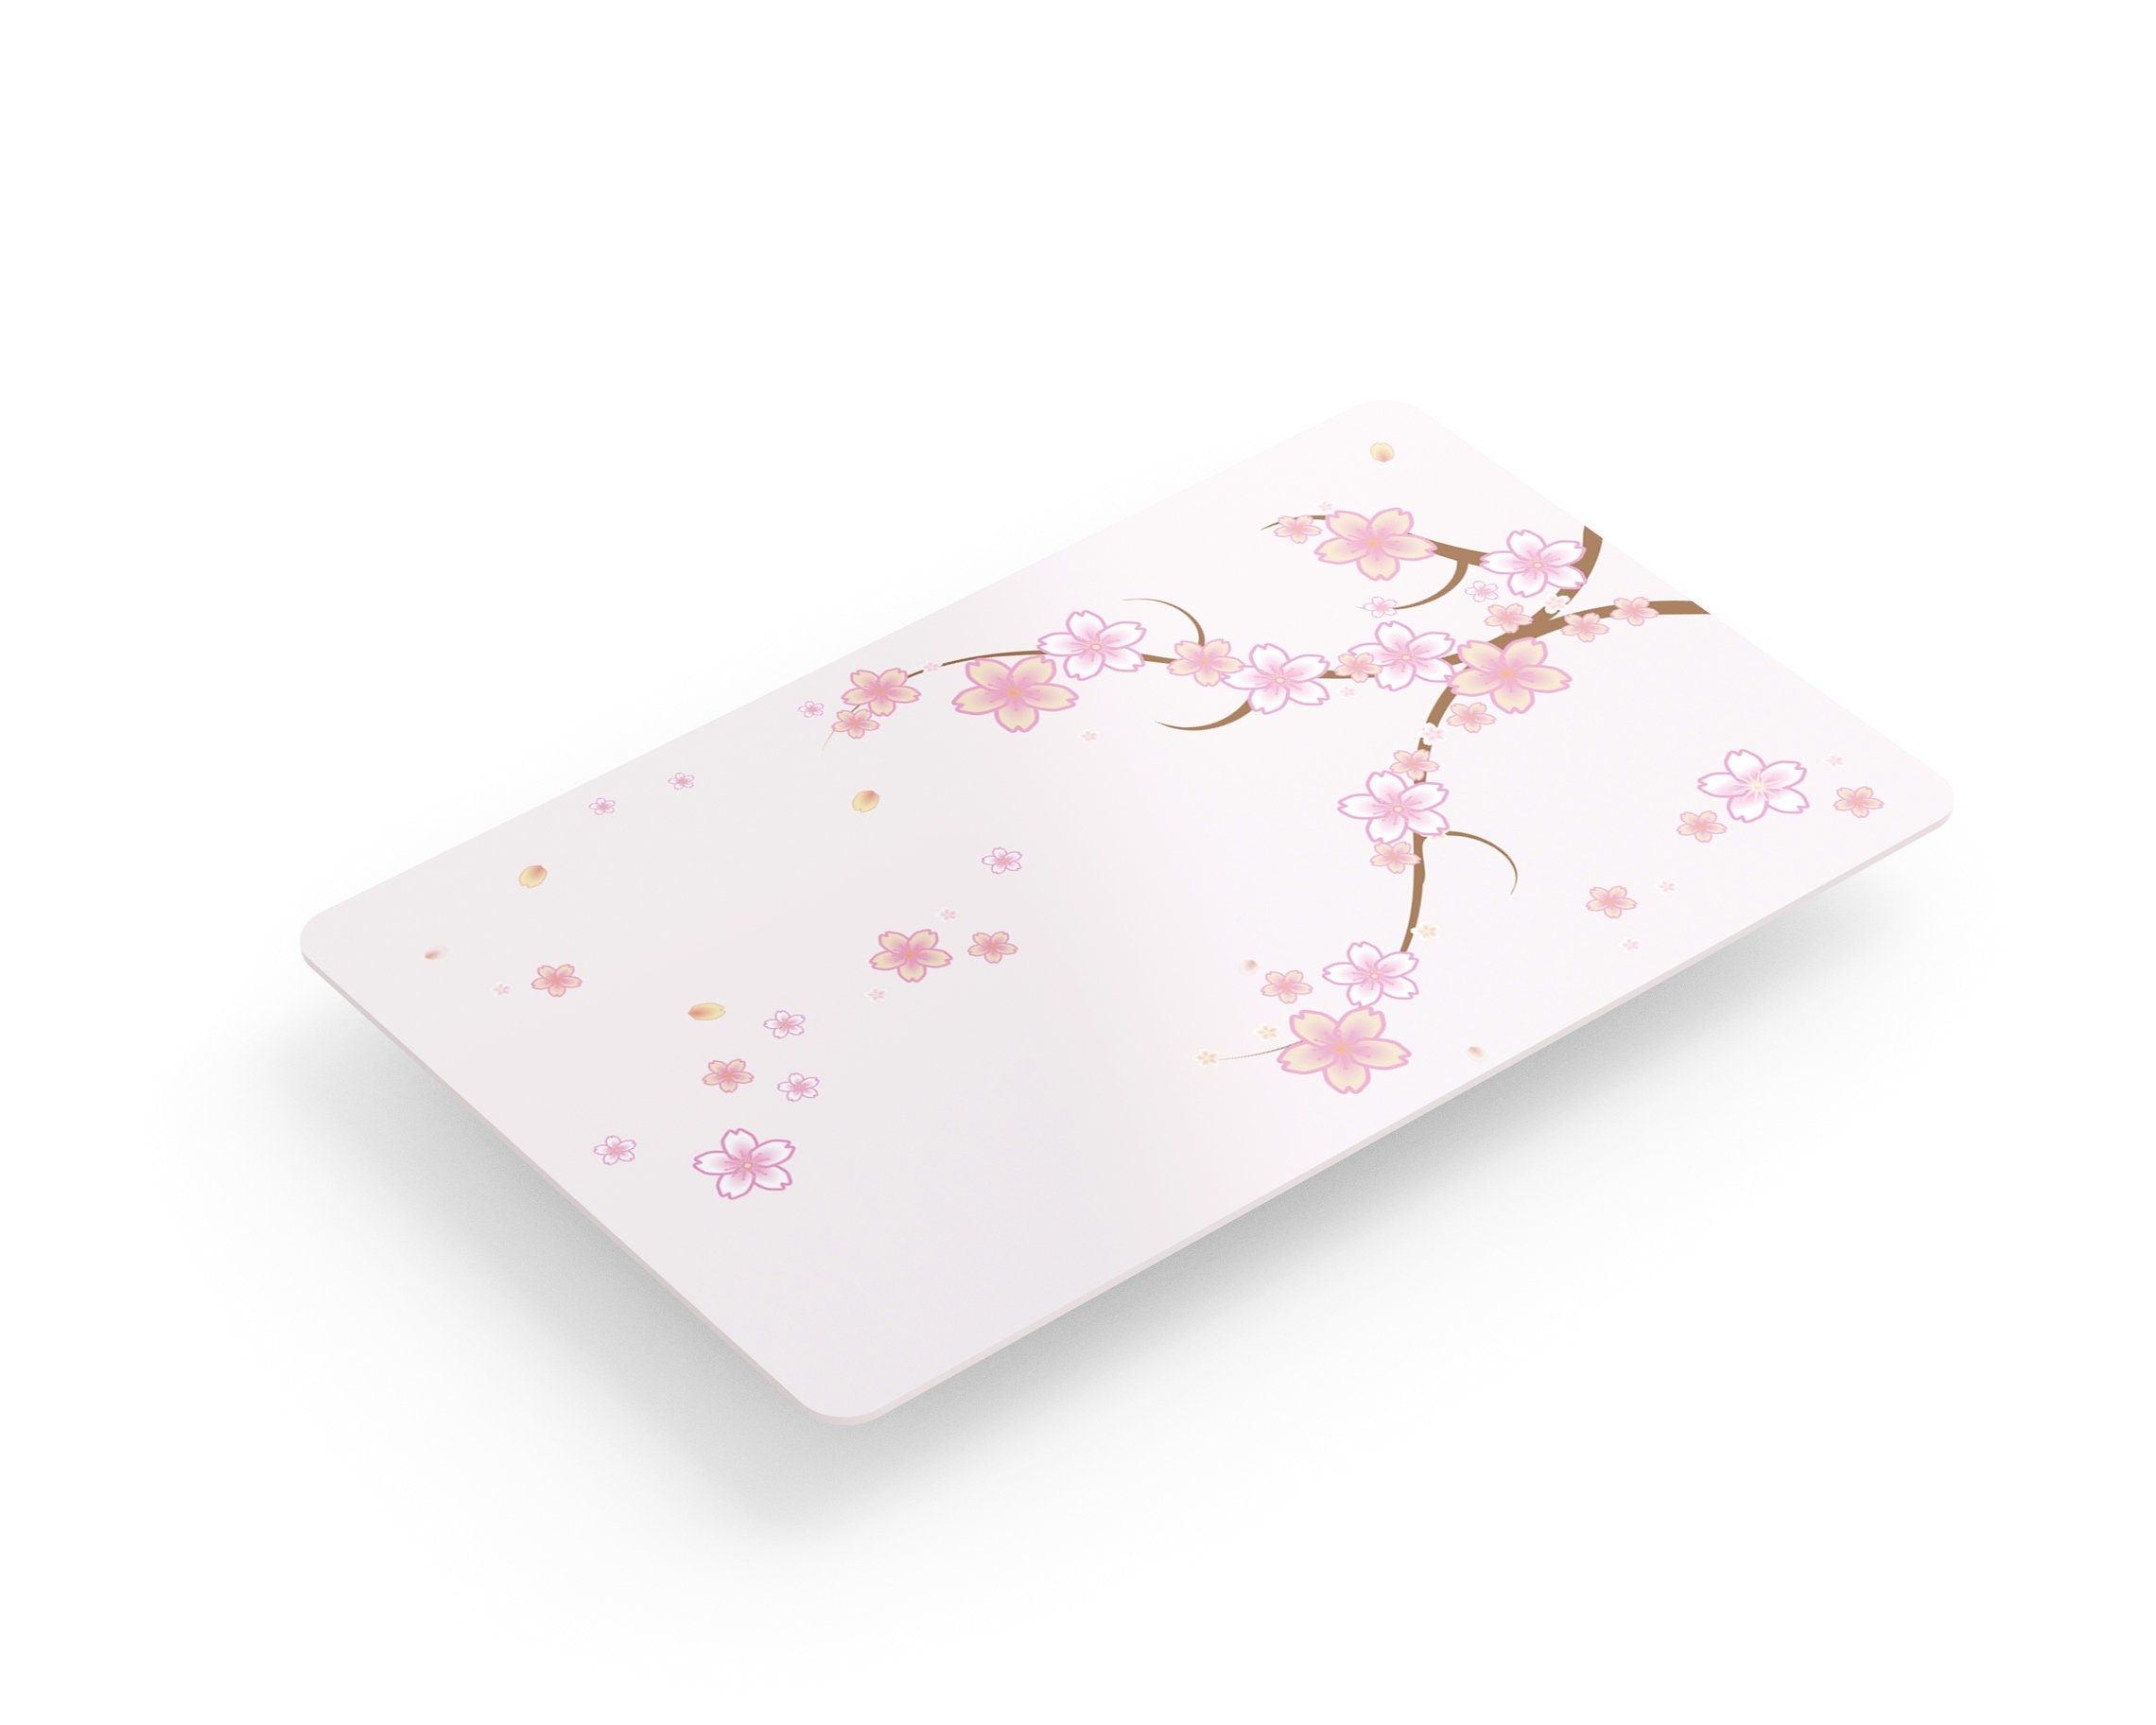  Cute Pink Flower Credit Card Stickers for Transportation, Key,  Debit, Credit, Card Cover No Bubble, Slim, Waterproof, Anti-Wrinkling  Removable Vinyl Bank Card Skin : Office Products